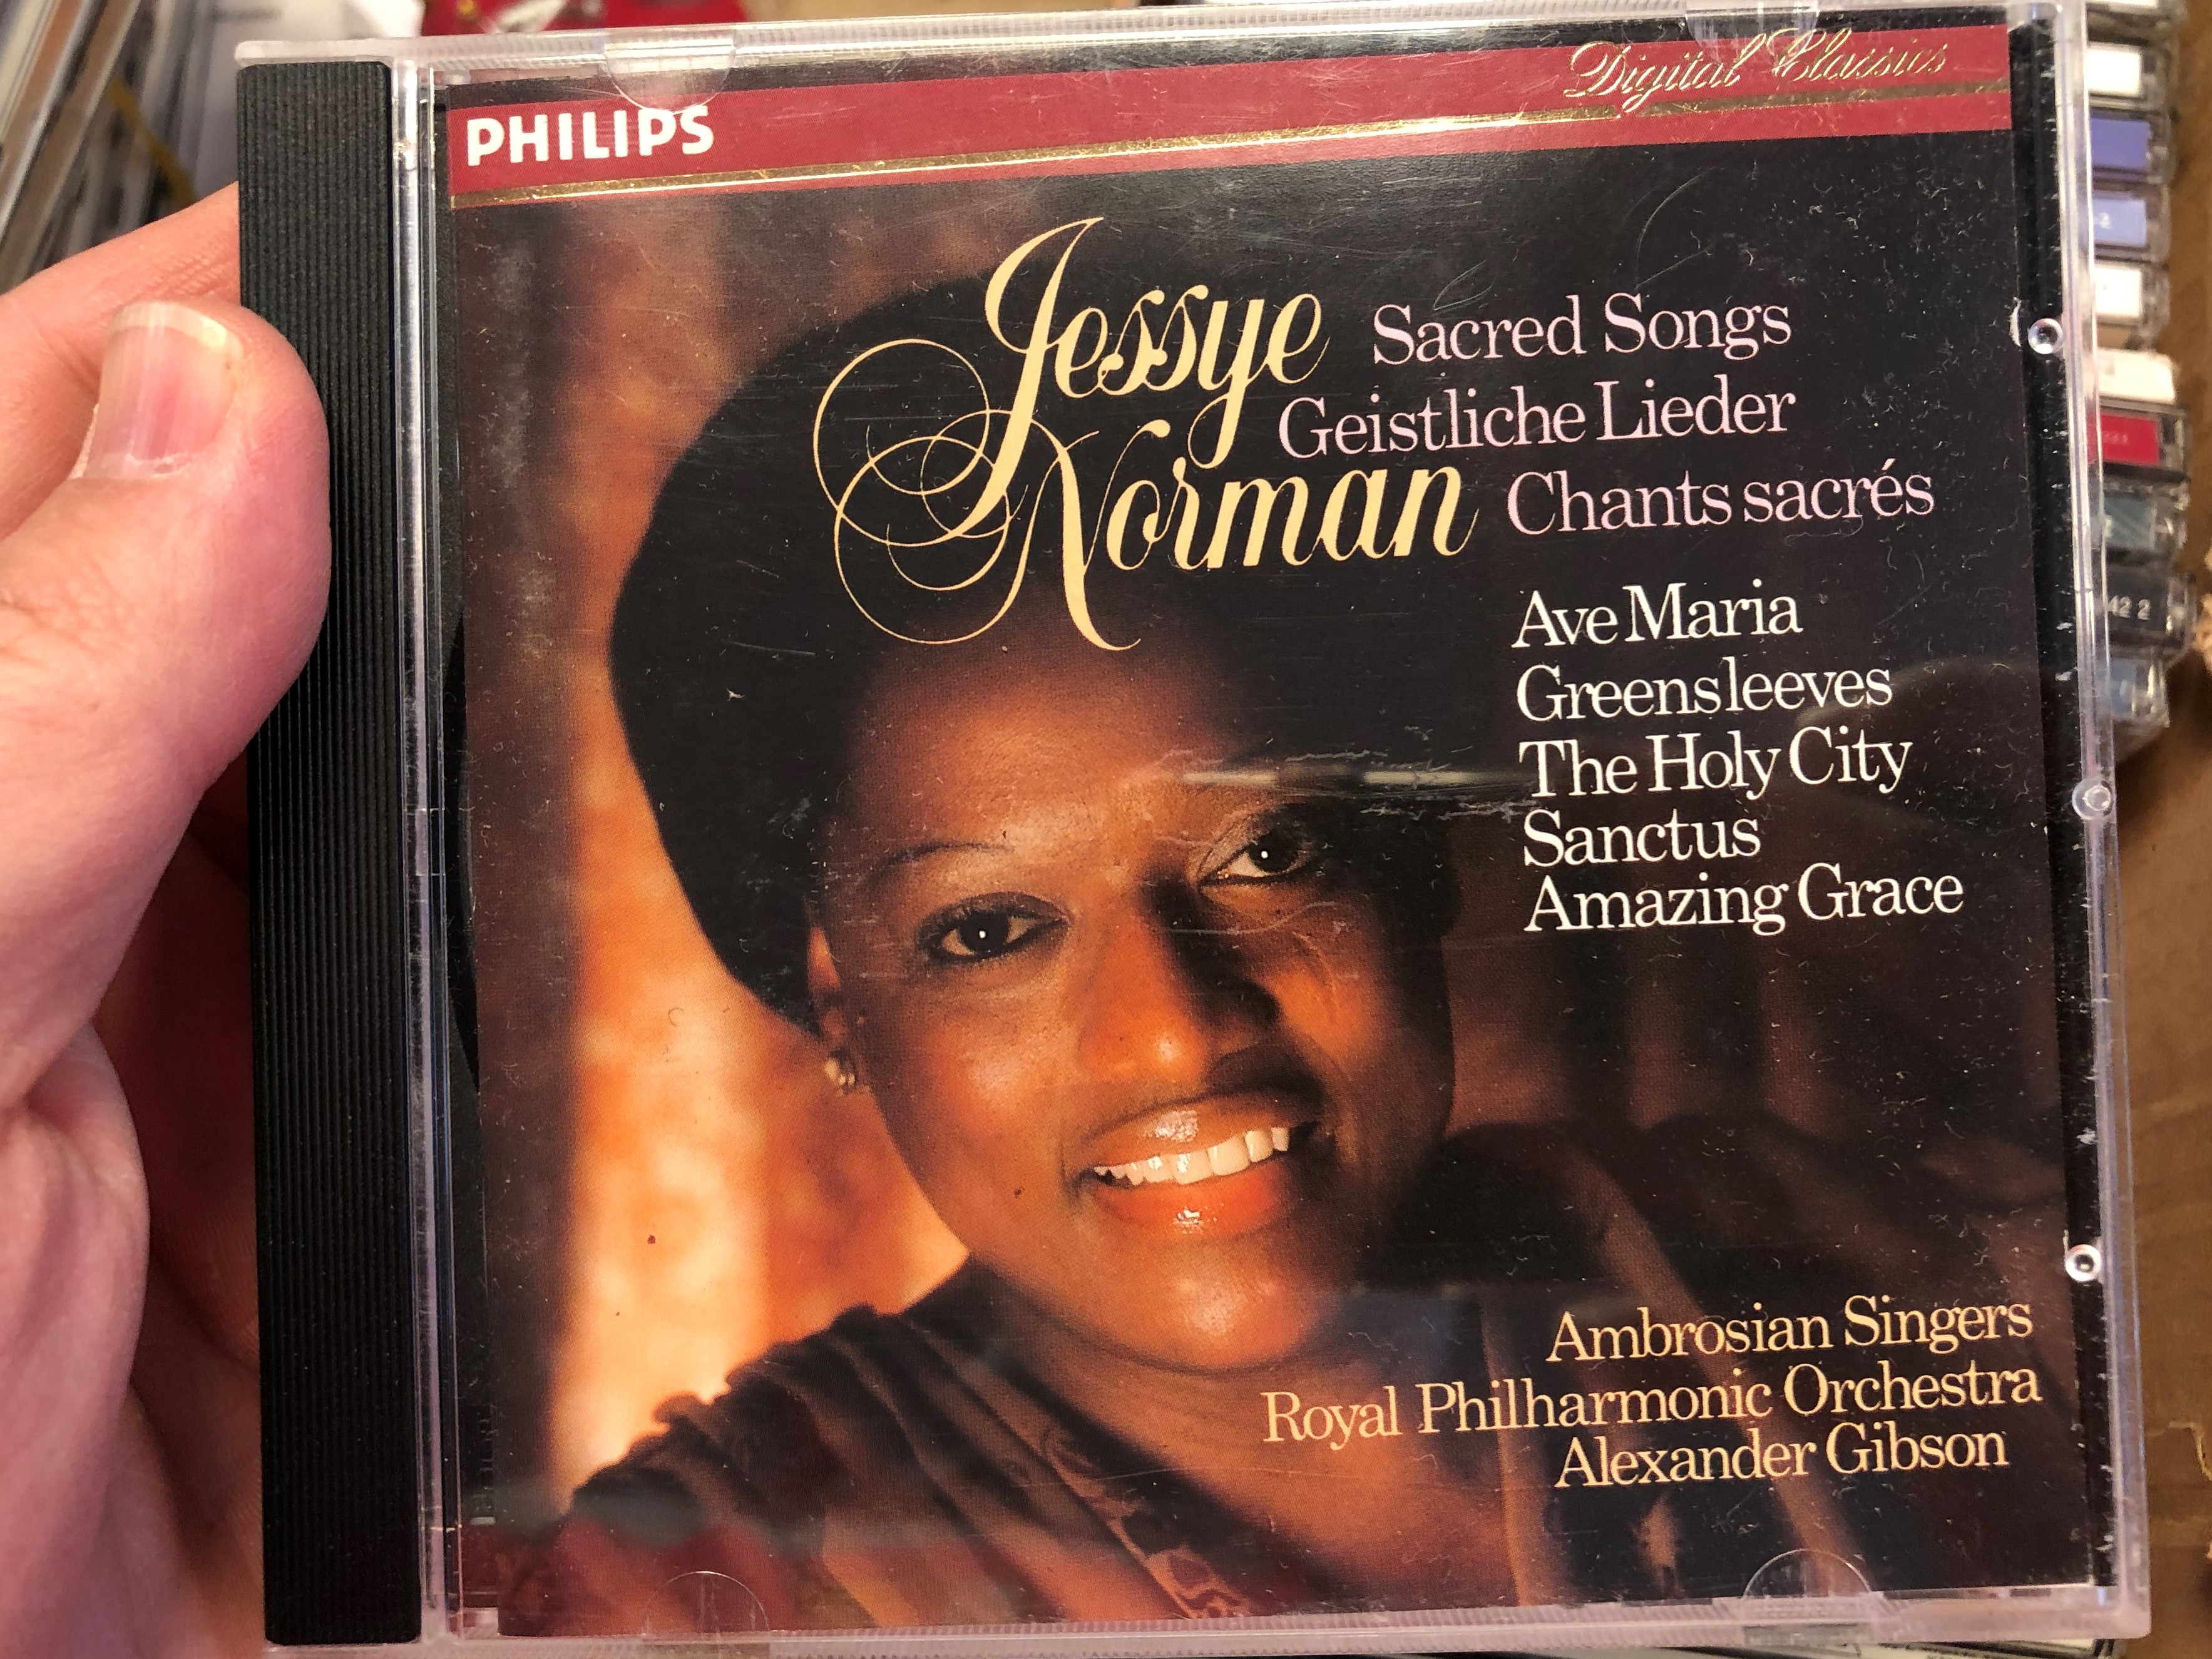 jessye-norman-sacred-songs-ave-maria-greensleeves-the-holy-city-sanctus-amazing-grace-ambrosian-singers-royal-philharmonic-orchestra-alexander-gibson-philips-audio-cd-400-019-2-1-.jpg